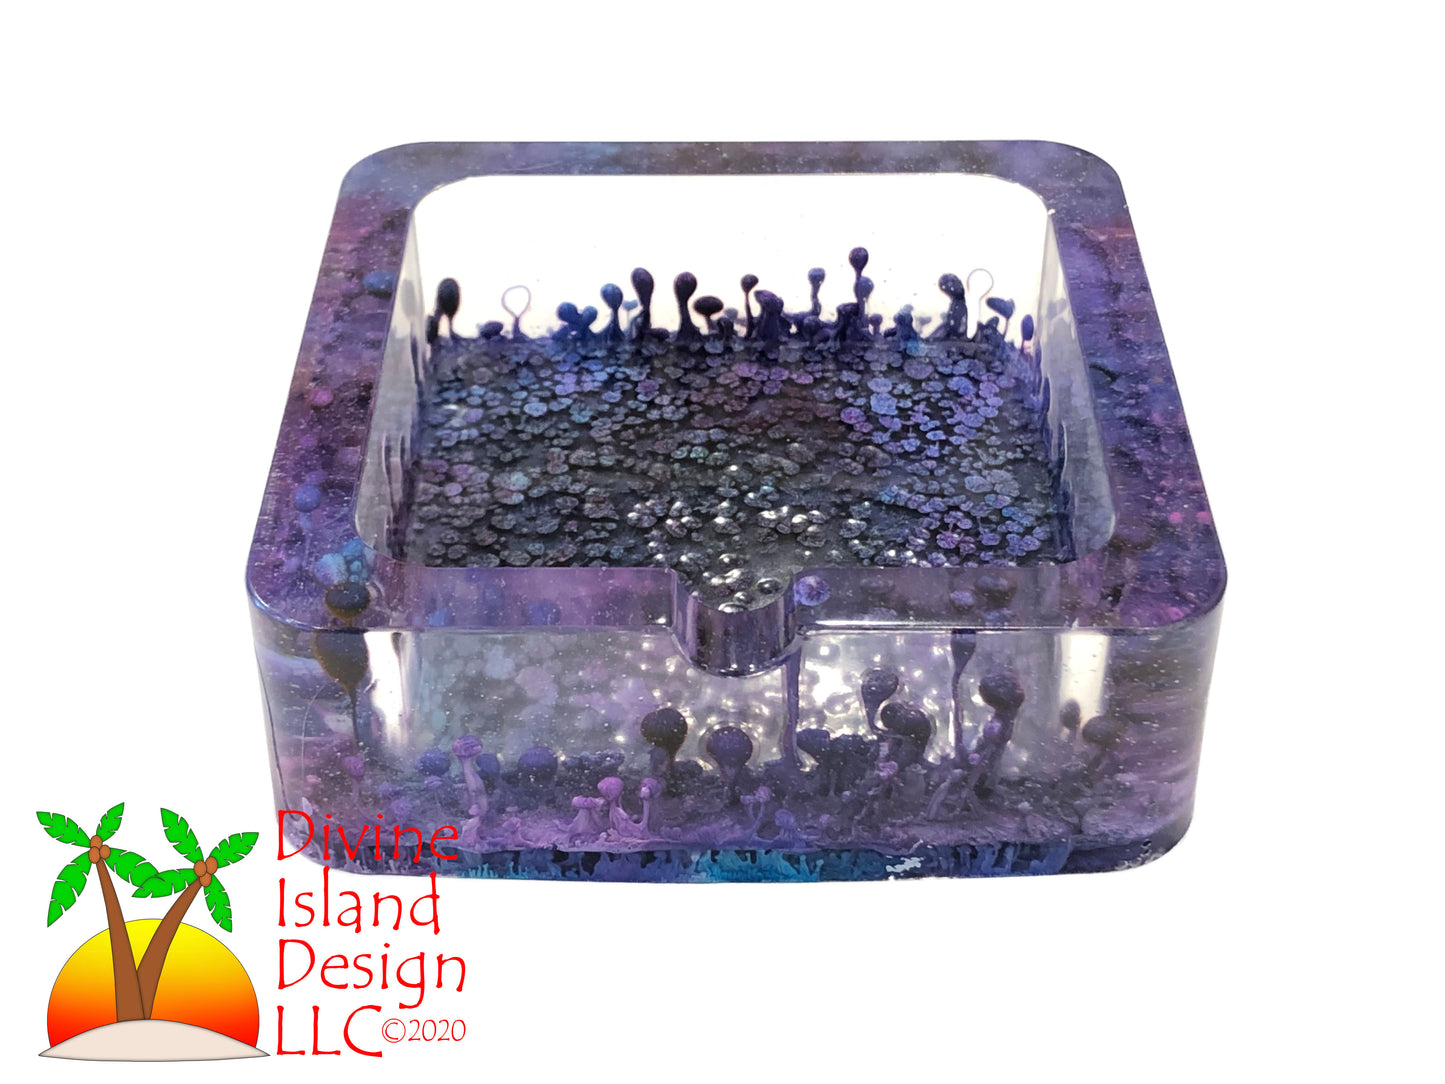 Square Purple and Blue Alcohol Ink Trinket/Ashtray